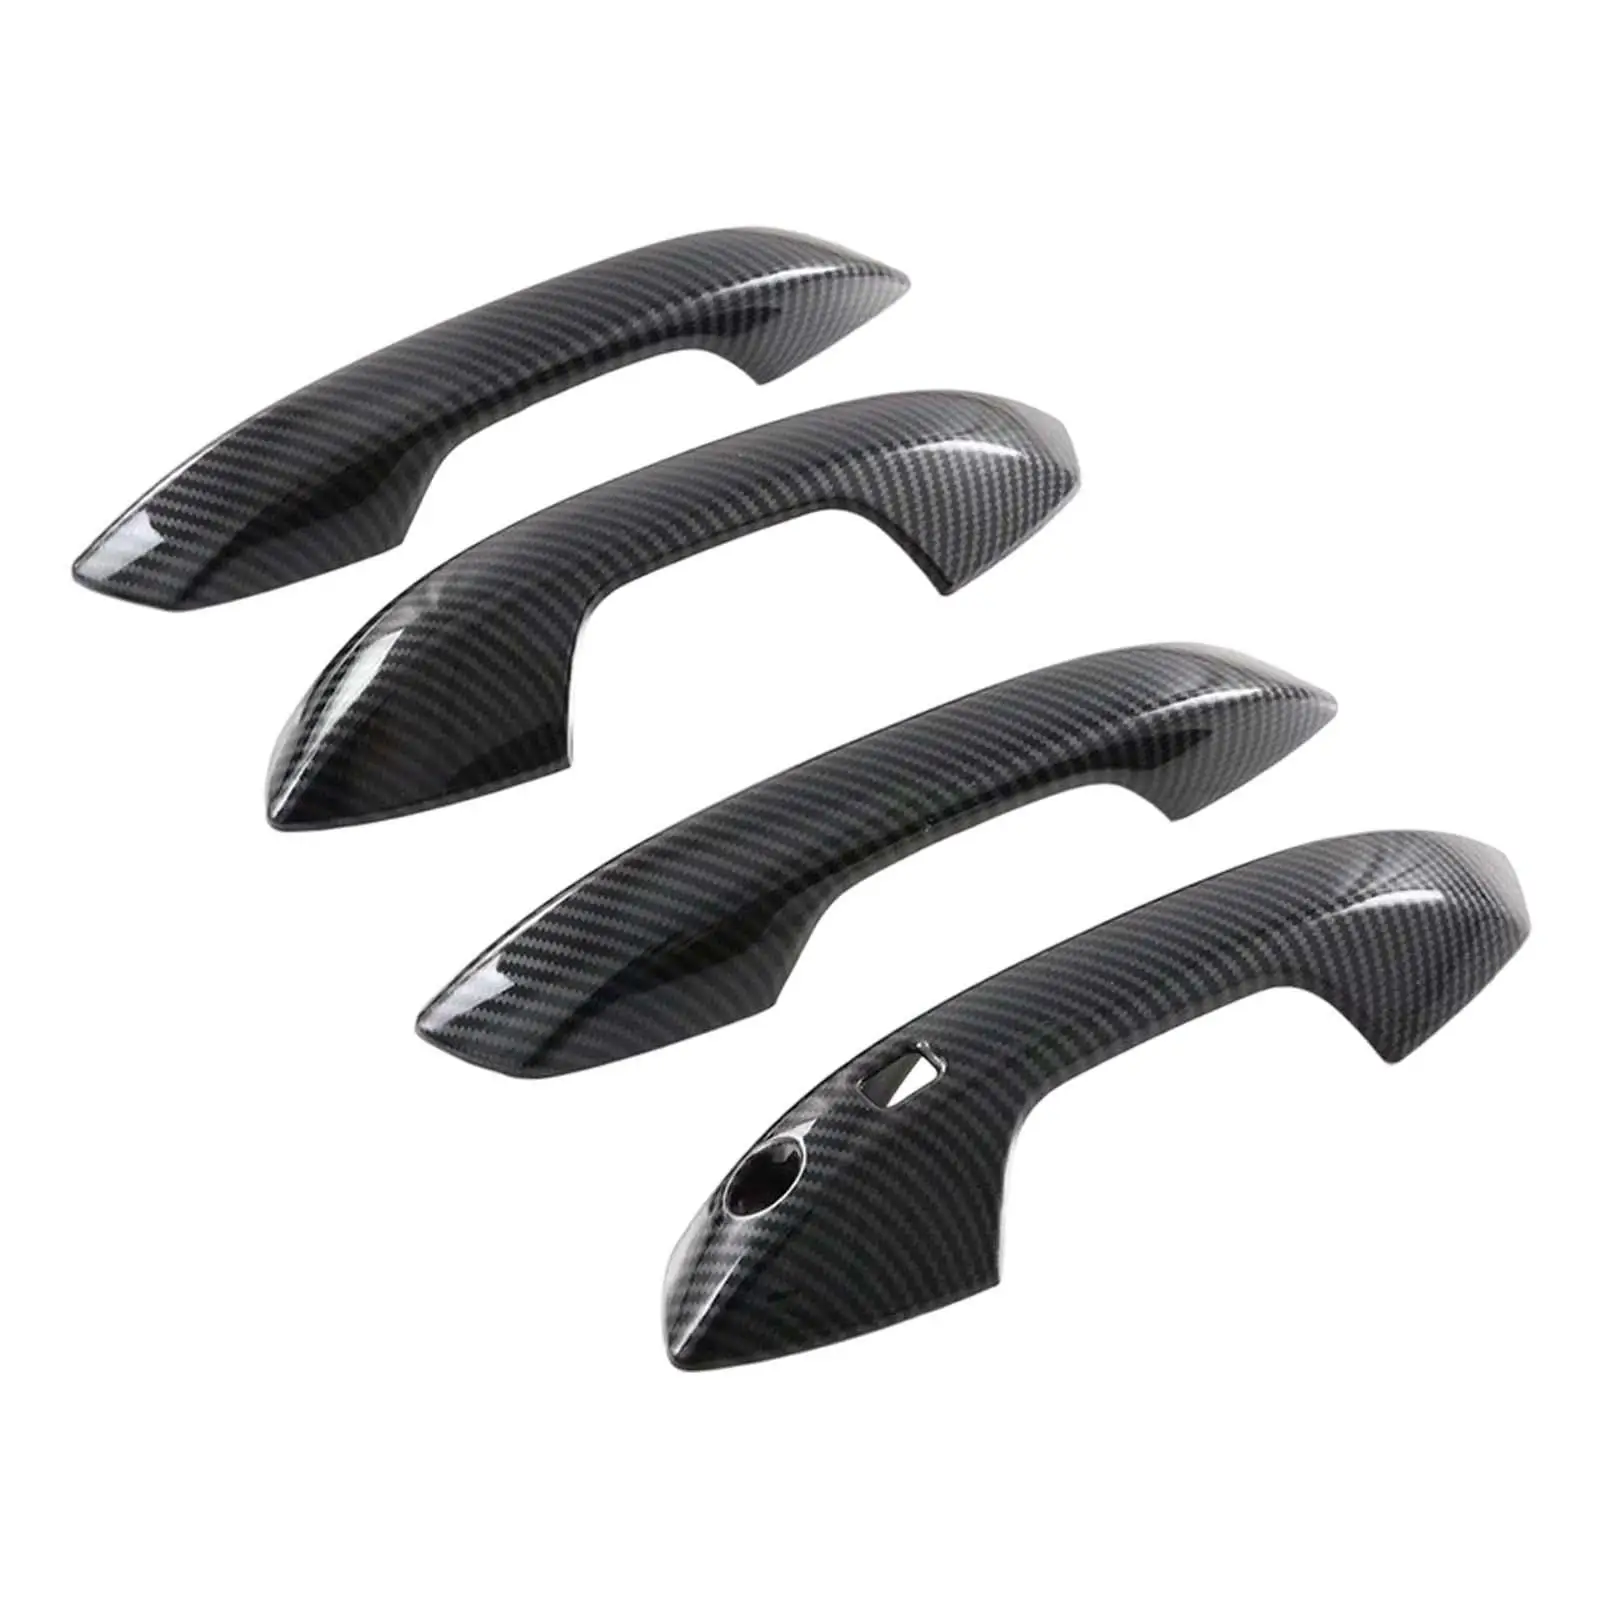 4x Auto Door Handle Protective Cover Scratch Guard Trim Door Knob Parts Replacement Decorative Protector for Byd Atto 3